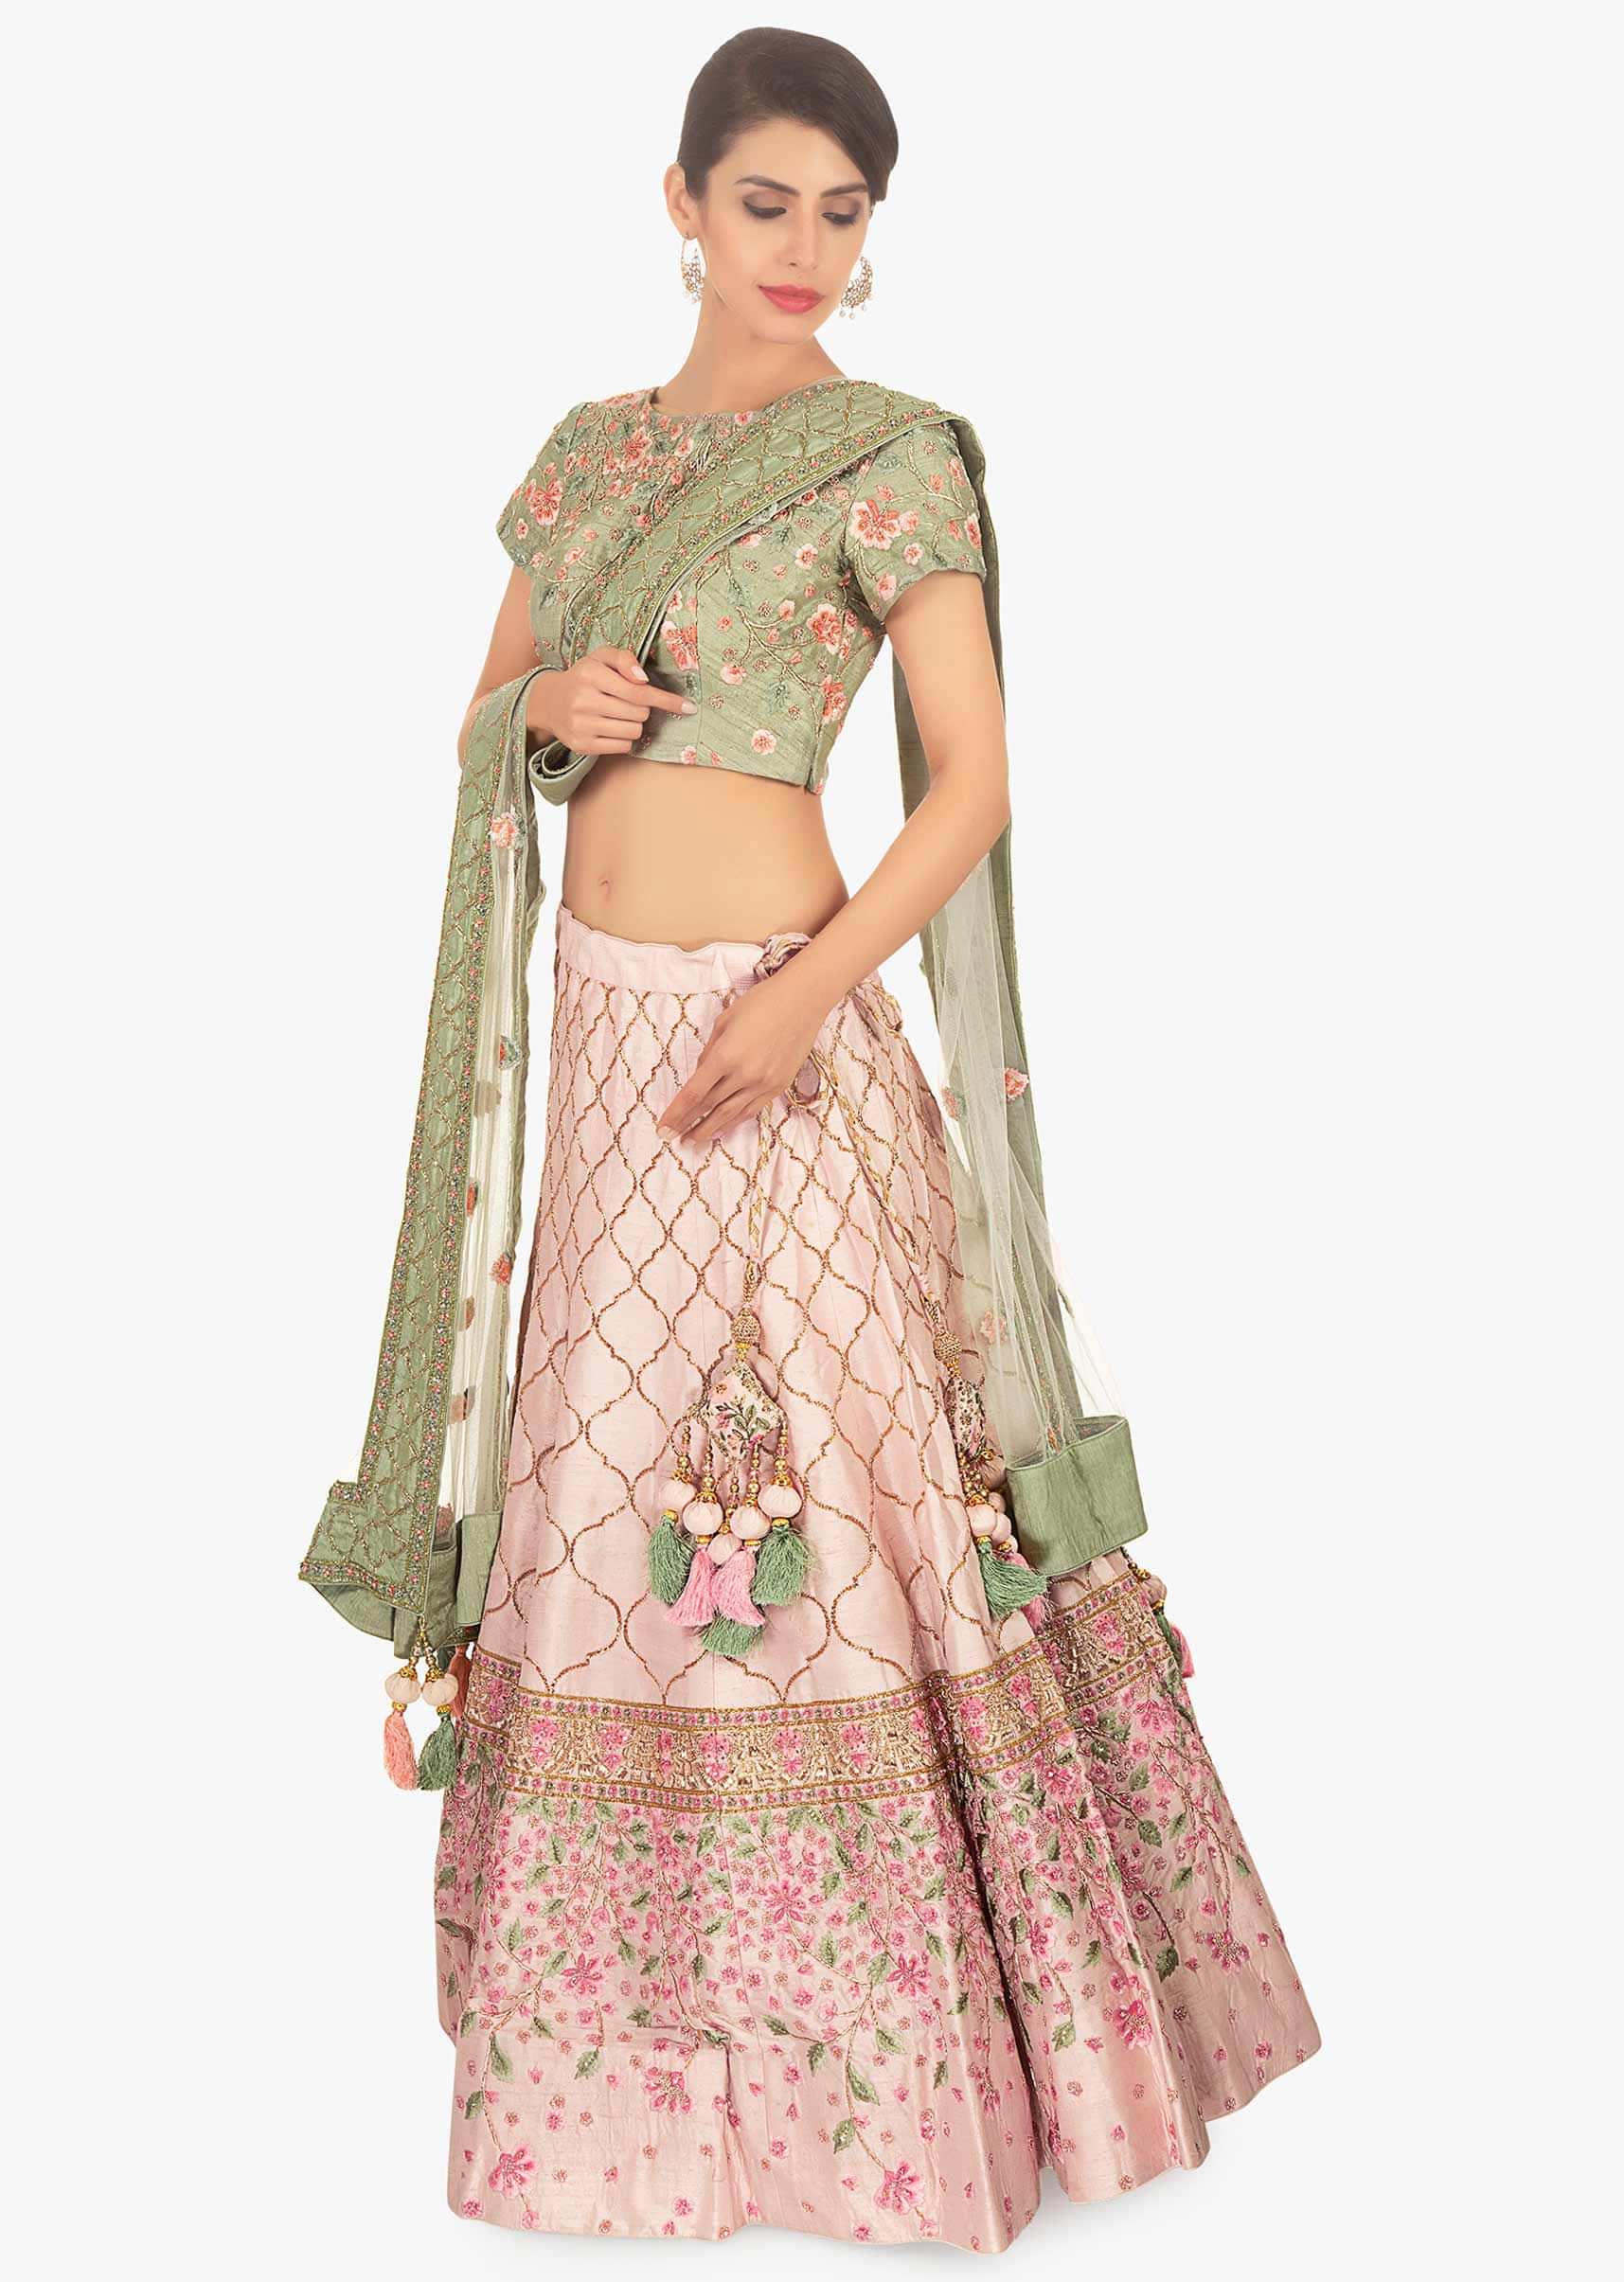 Sage green floral embroidered blouse paired with creamish pink lehenga and off white net dupatta